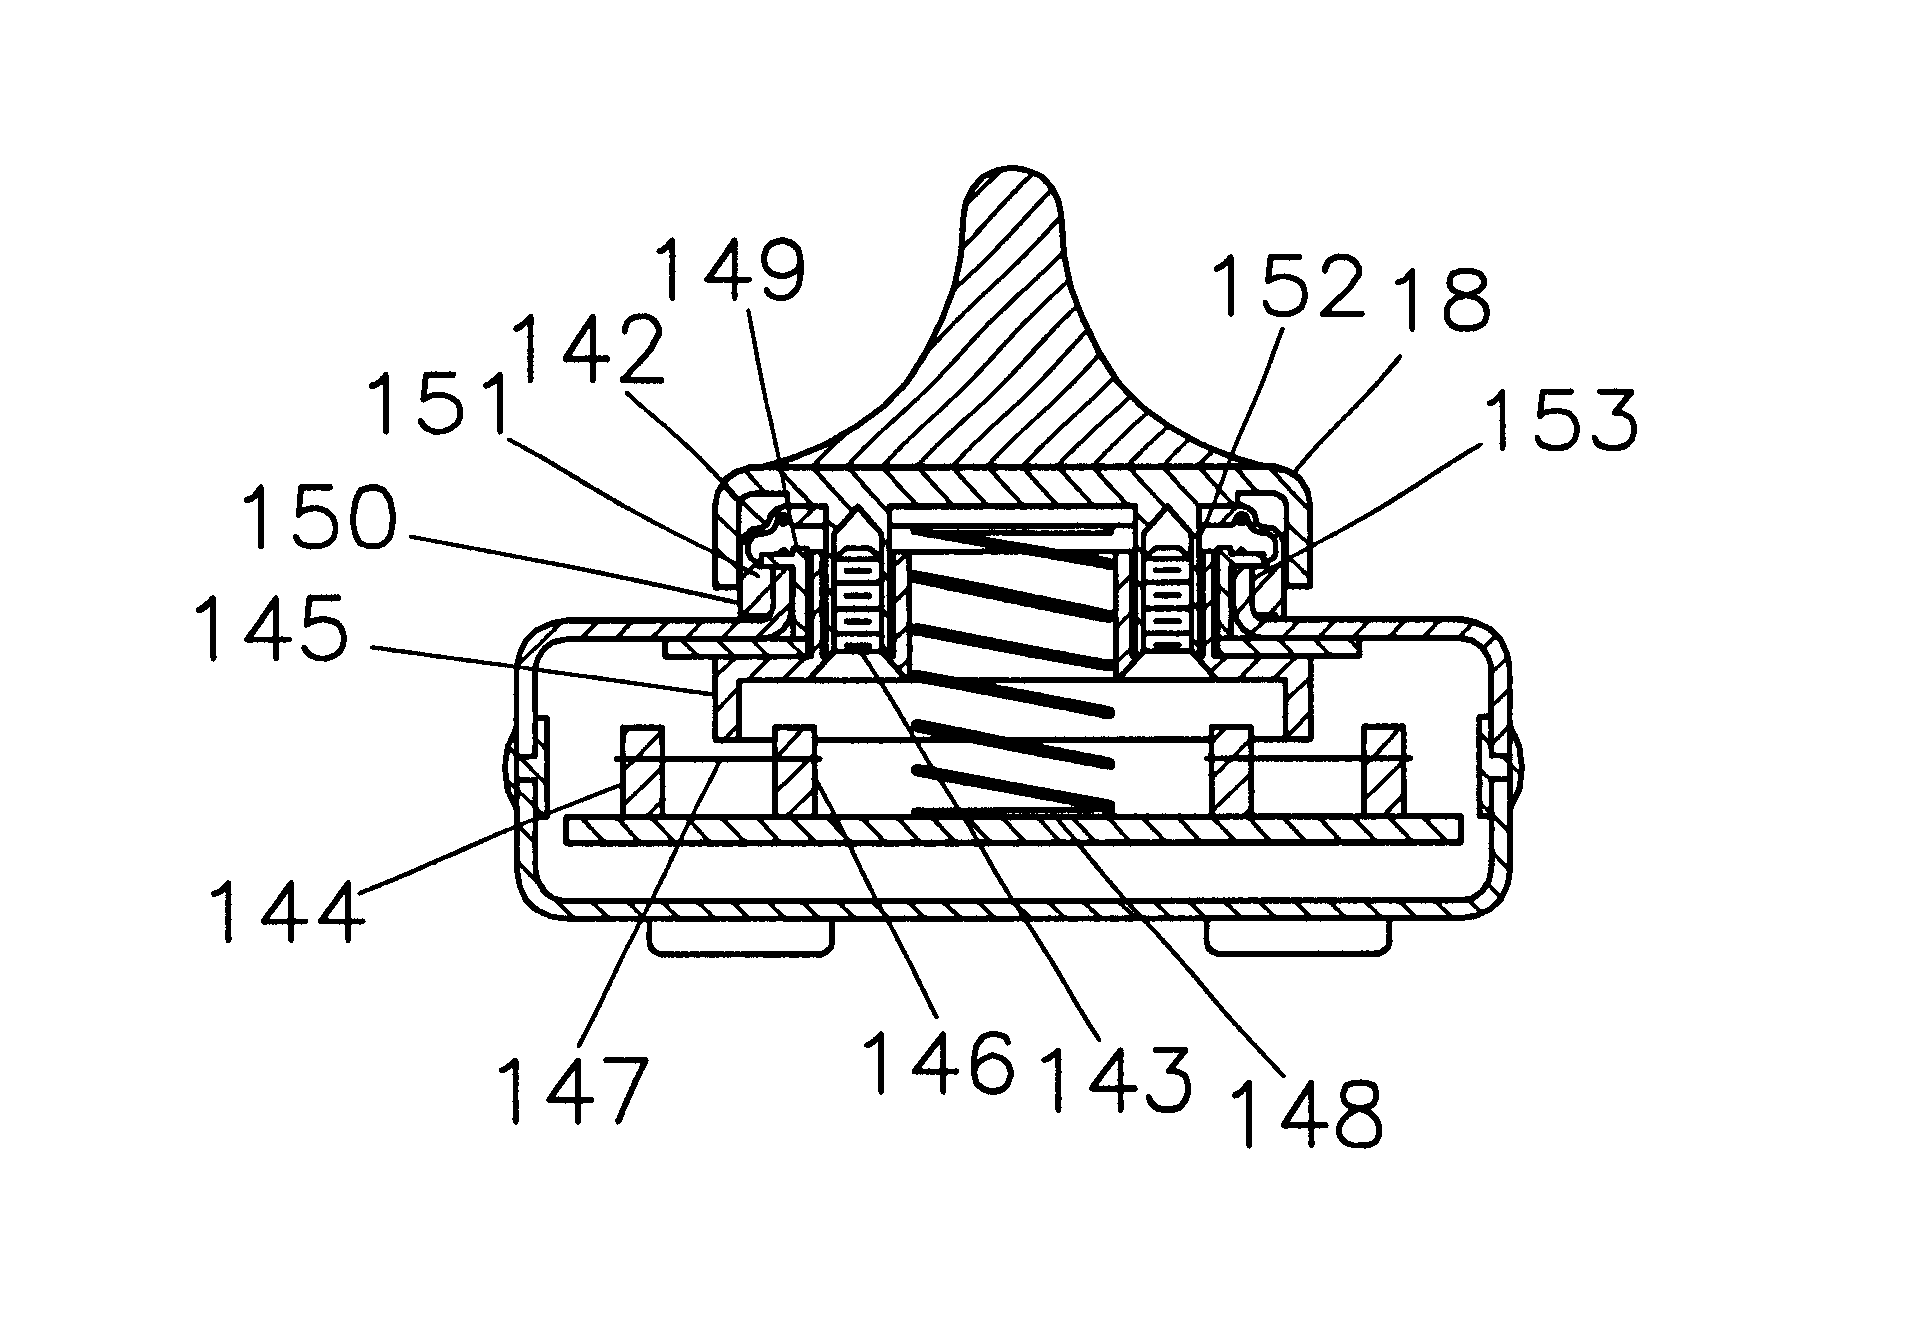 Articulator and optical detection cursor positioning device